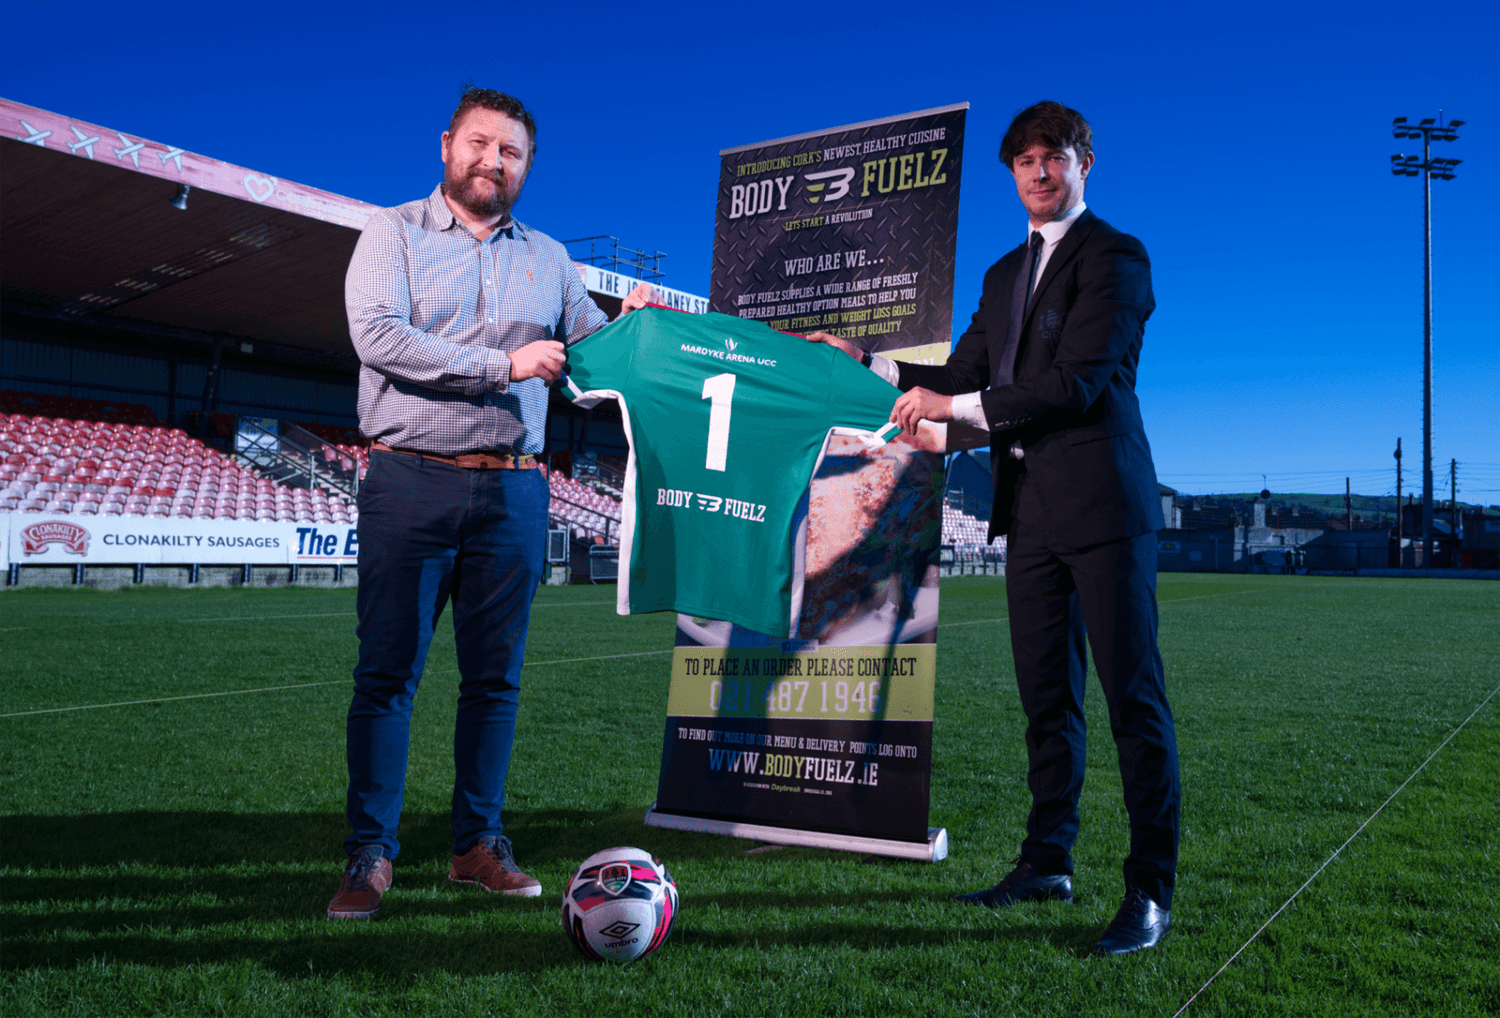 Bodyfuelz becomes official nutritional food supplier of Cork City FC!